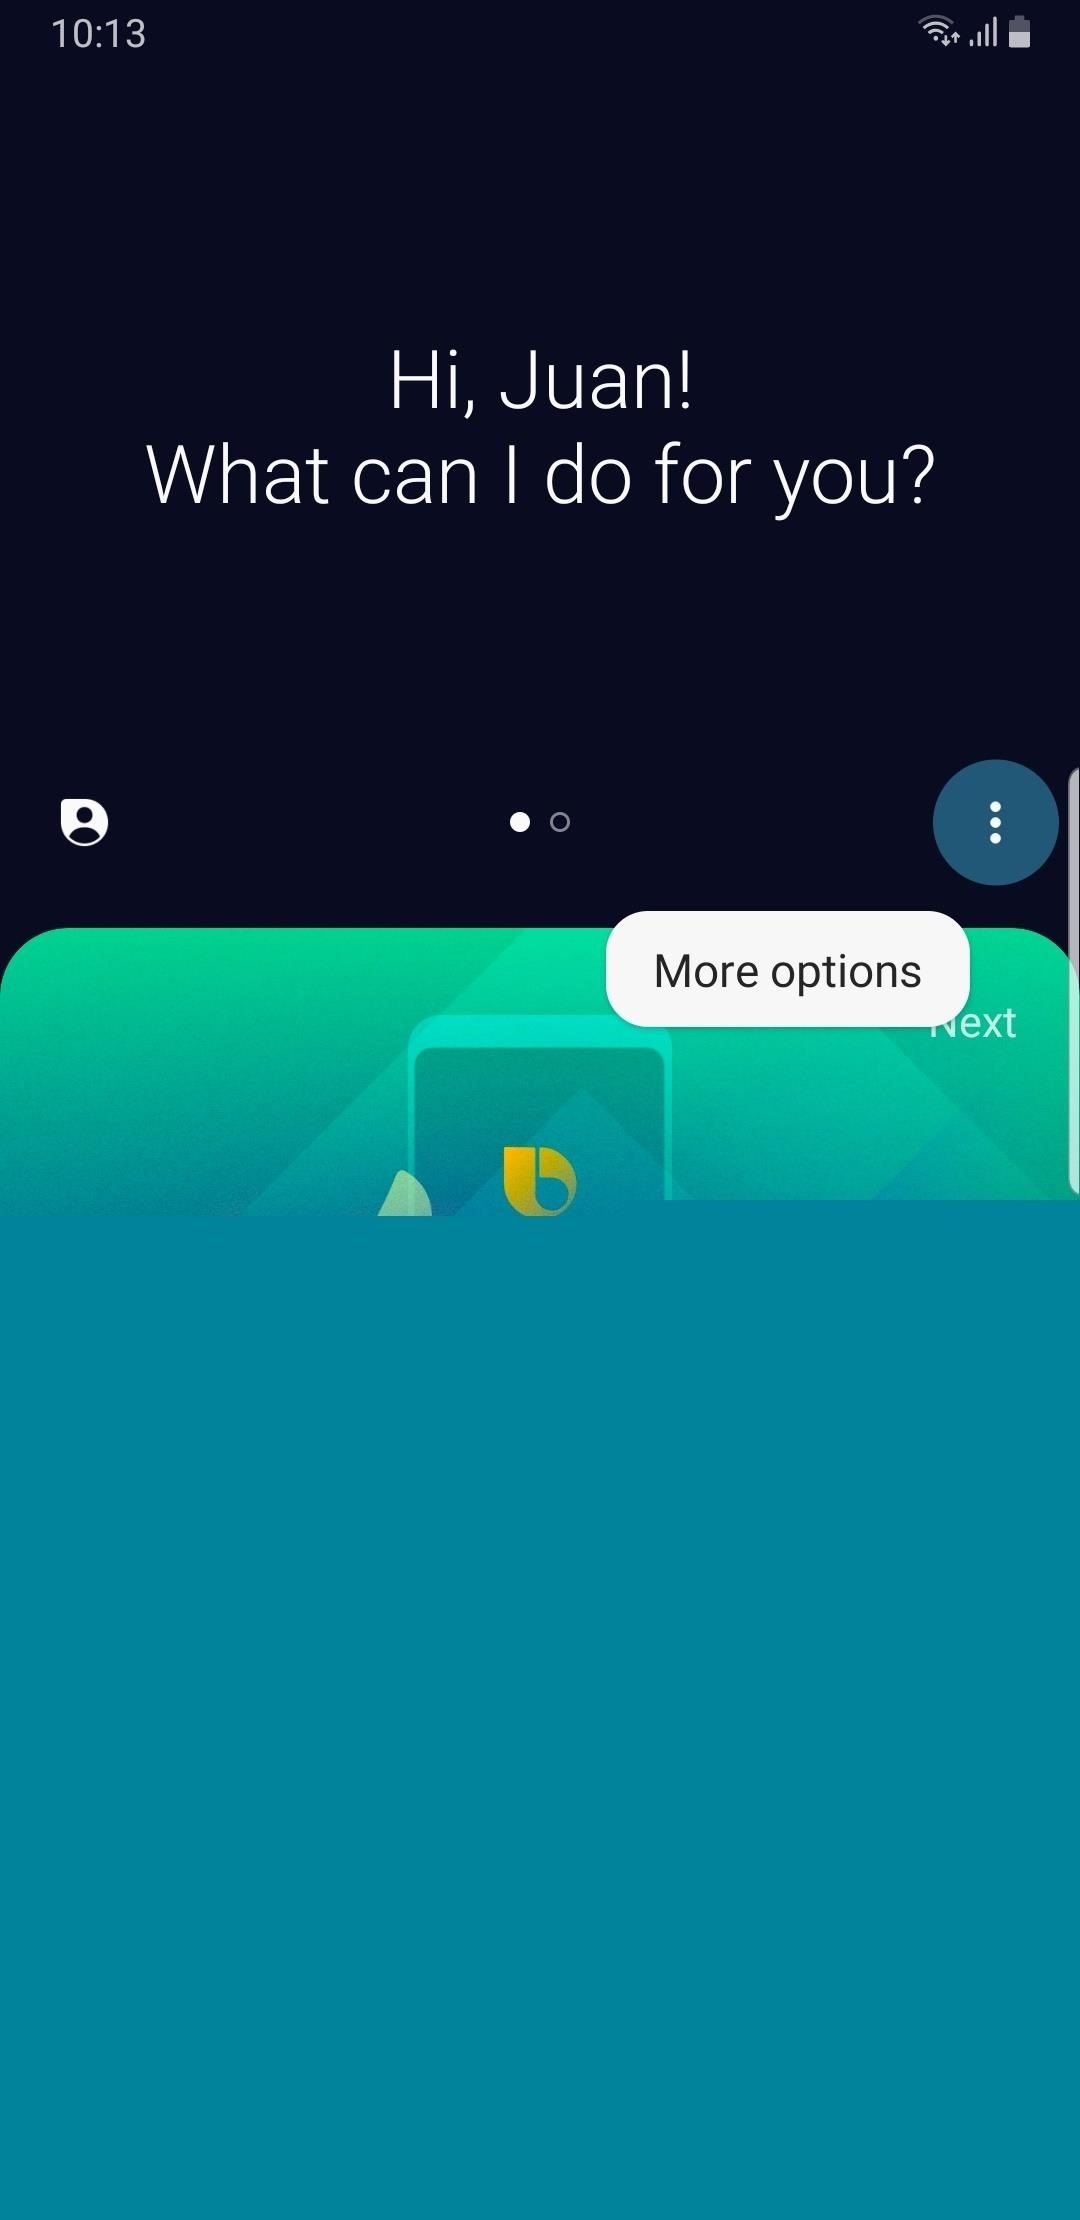 The Easiest Way to Make the Bixby Button Open Google Assistant on Your Galaxy